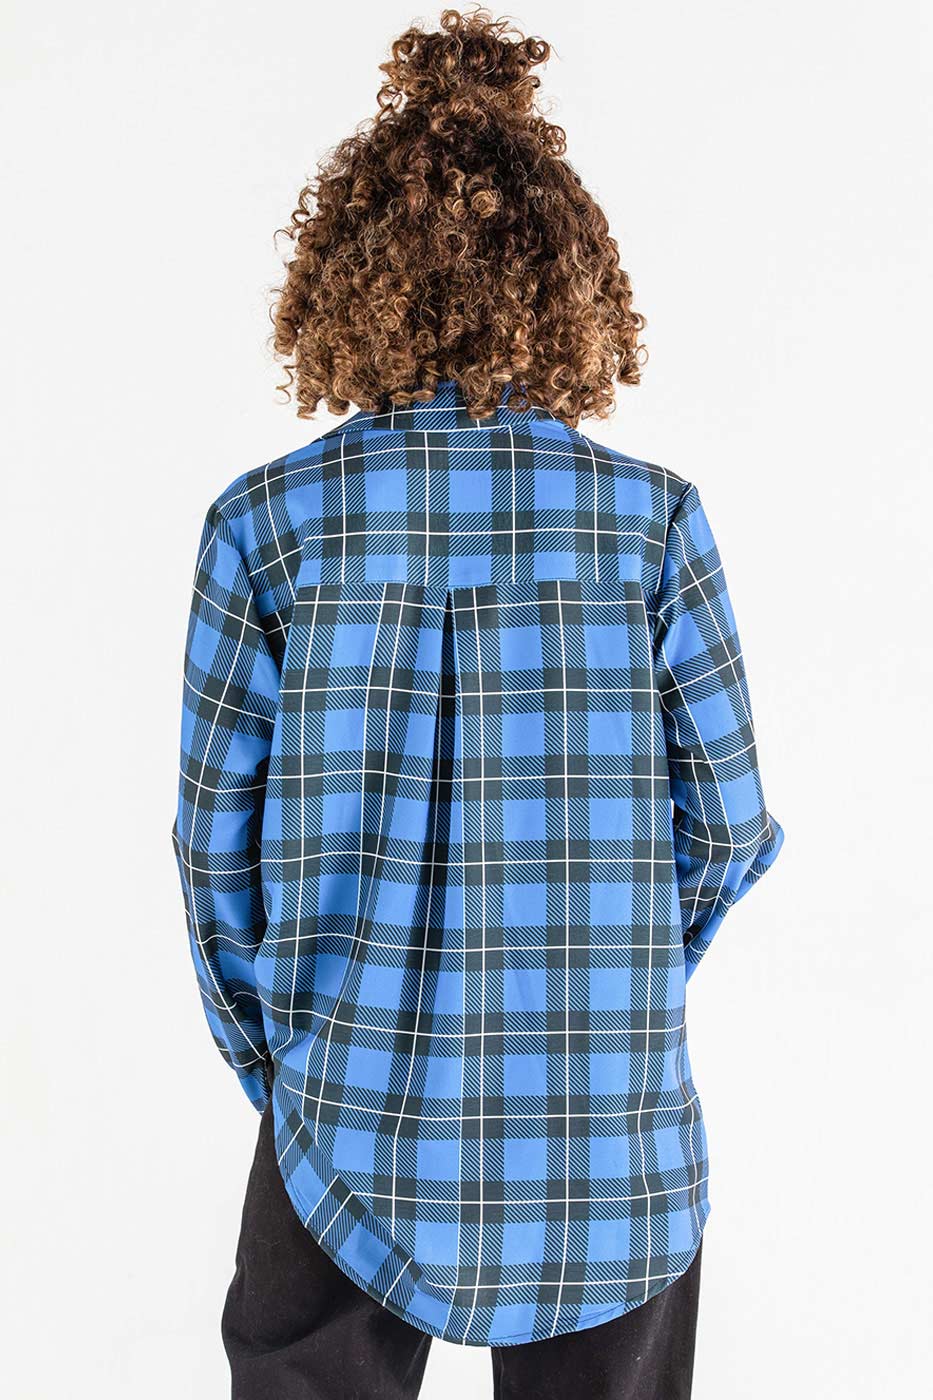 Casual Shirt In Checkered Blue online from Dresscode - Egypt